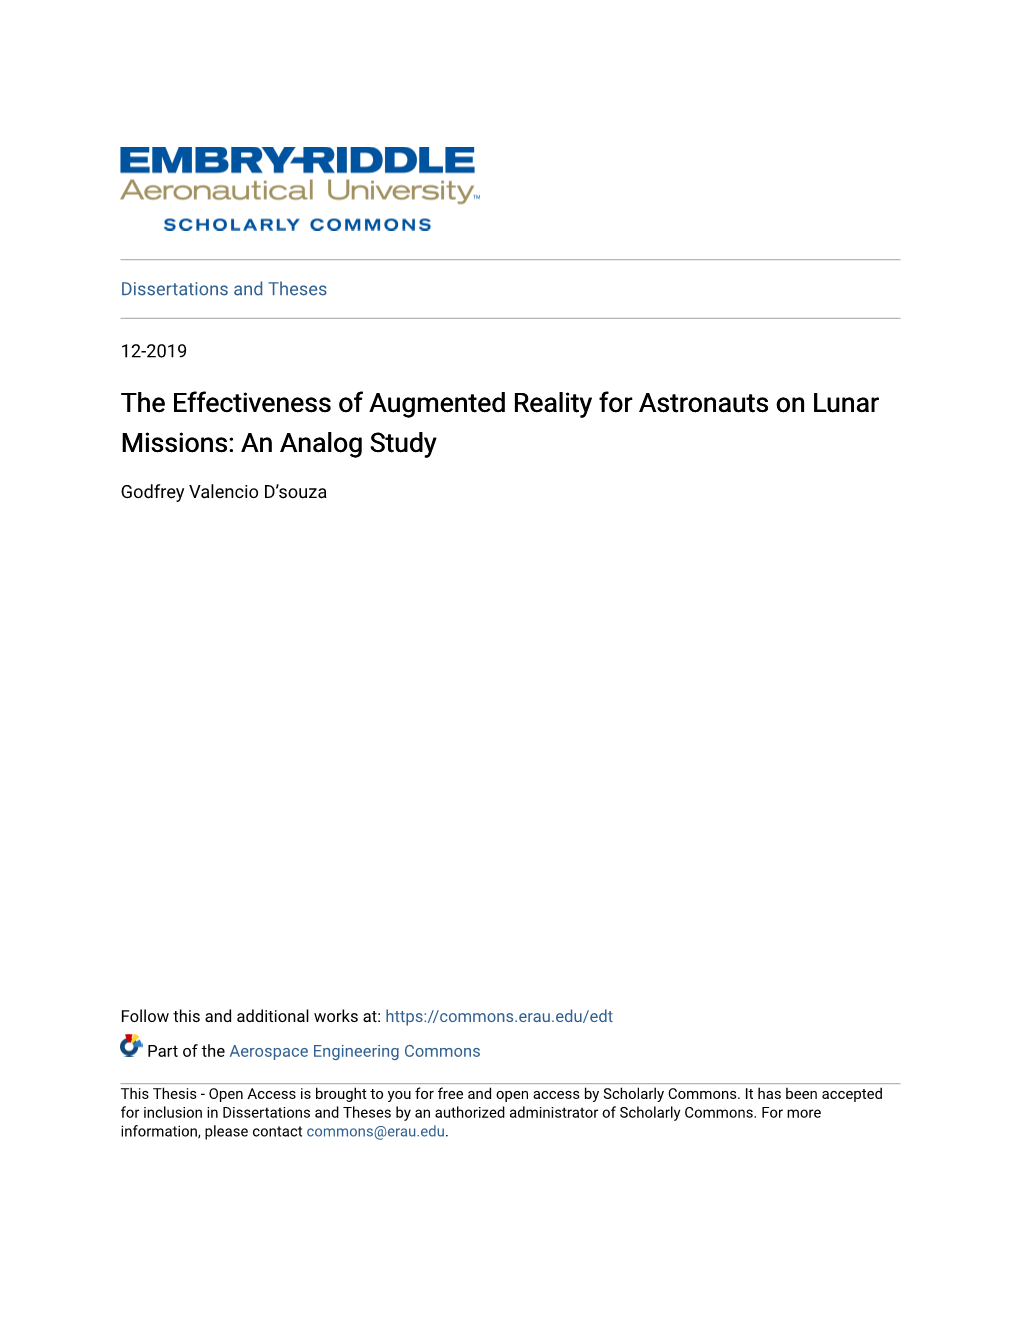 The Effectiveness of Augmented Reality for Astronauts on Lunar Missions: an Analog Study